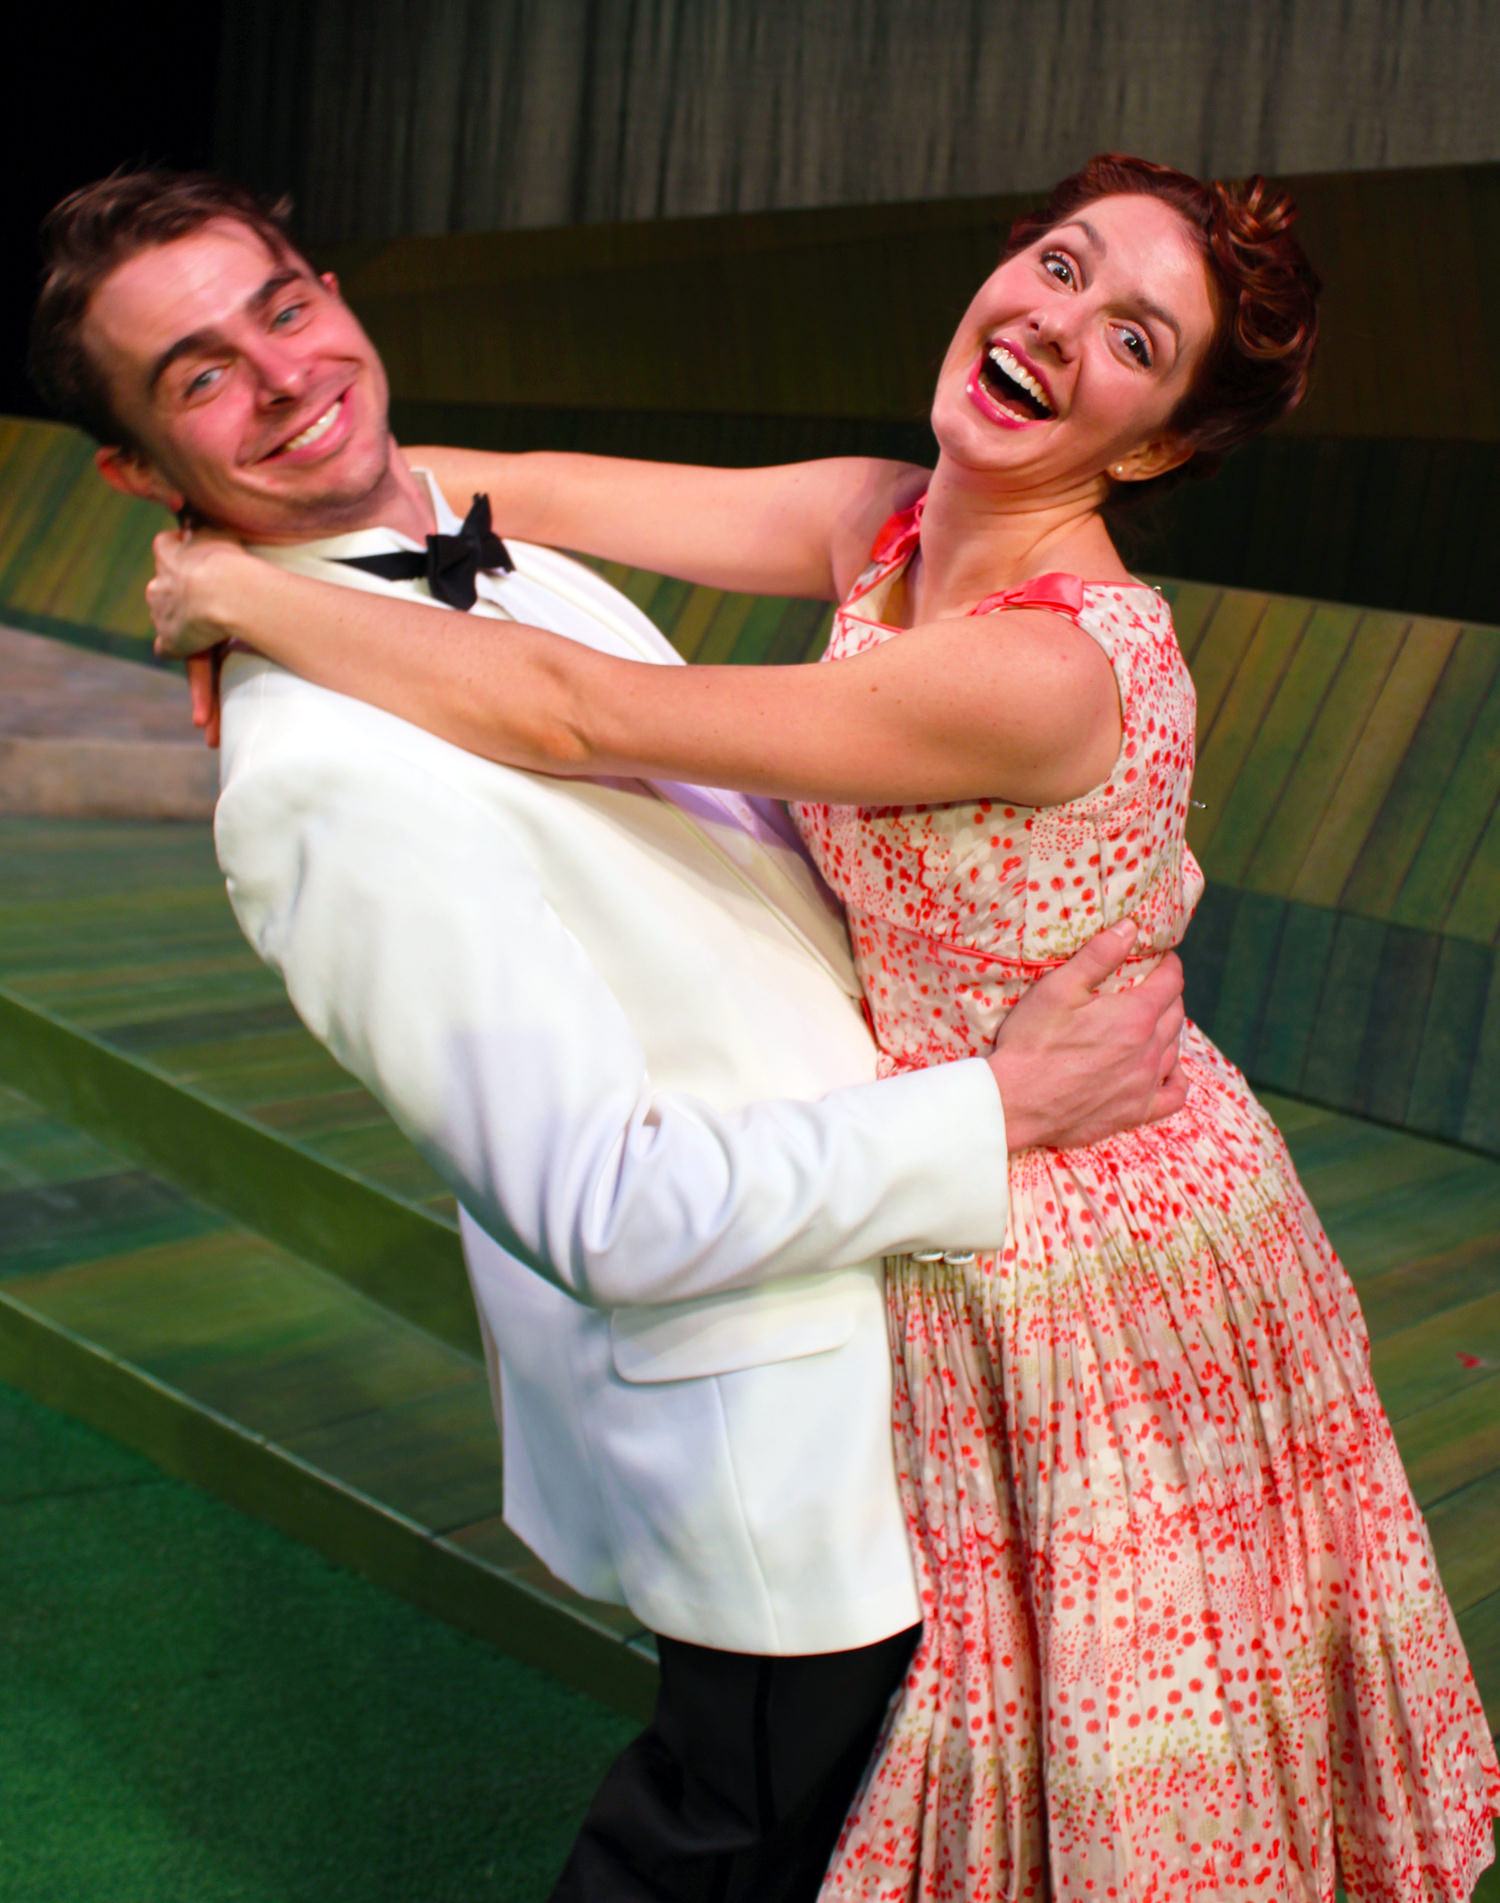 James Jelkin (Benedick) and Sarah Wintermeyer (Beatrice) star in William Shakespeare's Much Ado About Nothing, February 27-March 9 in the Nafe Katter Theatre at Connecticut Repertory Theatre, Storrs, CT. 